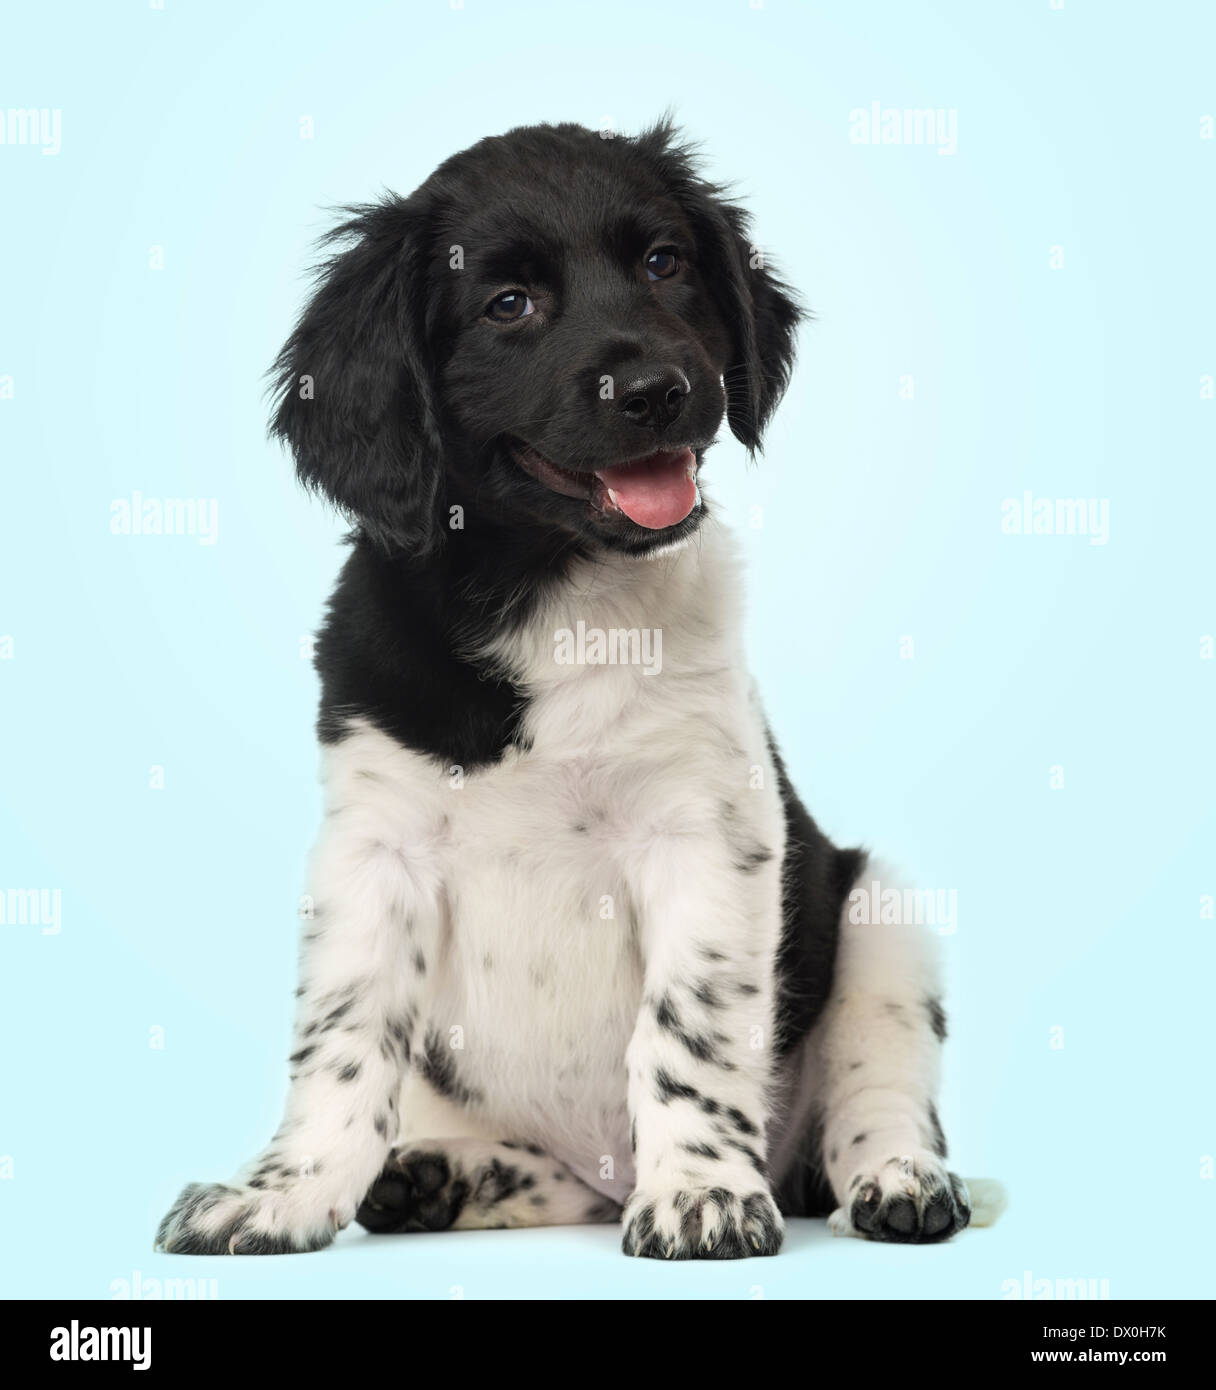 Stabyhoun puppy sitting, panting, looking at the camera, against blue background Stock Photo